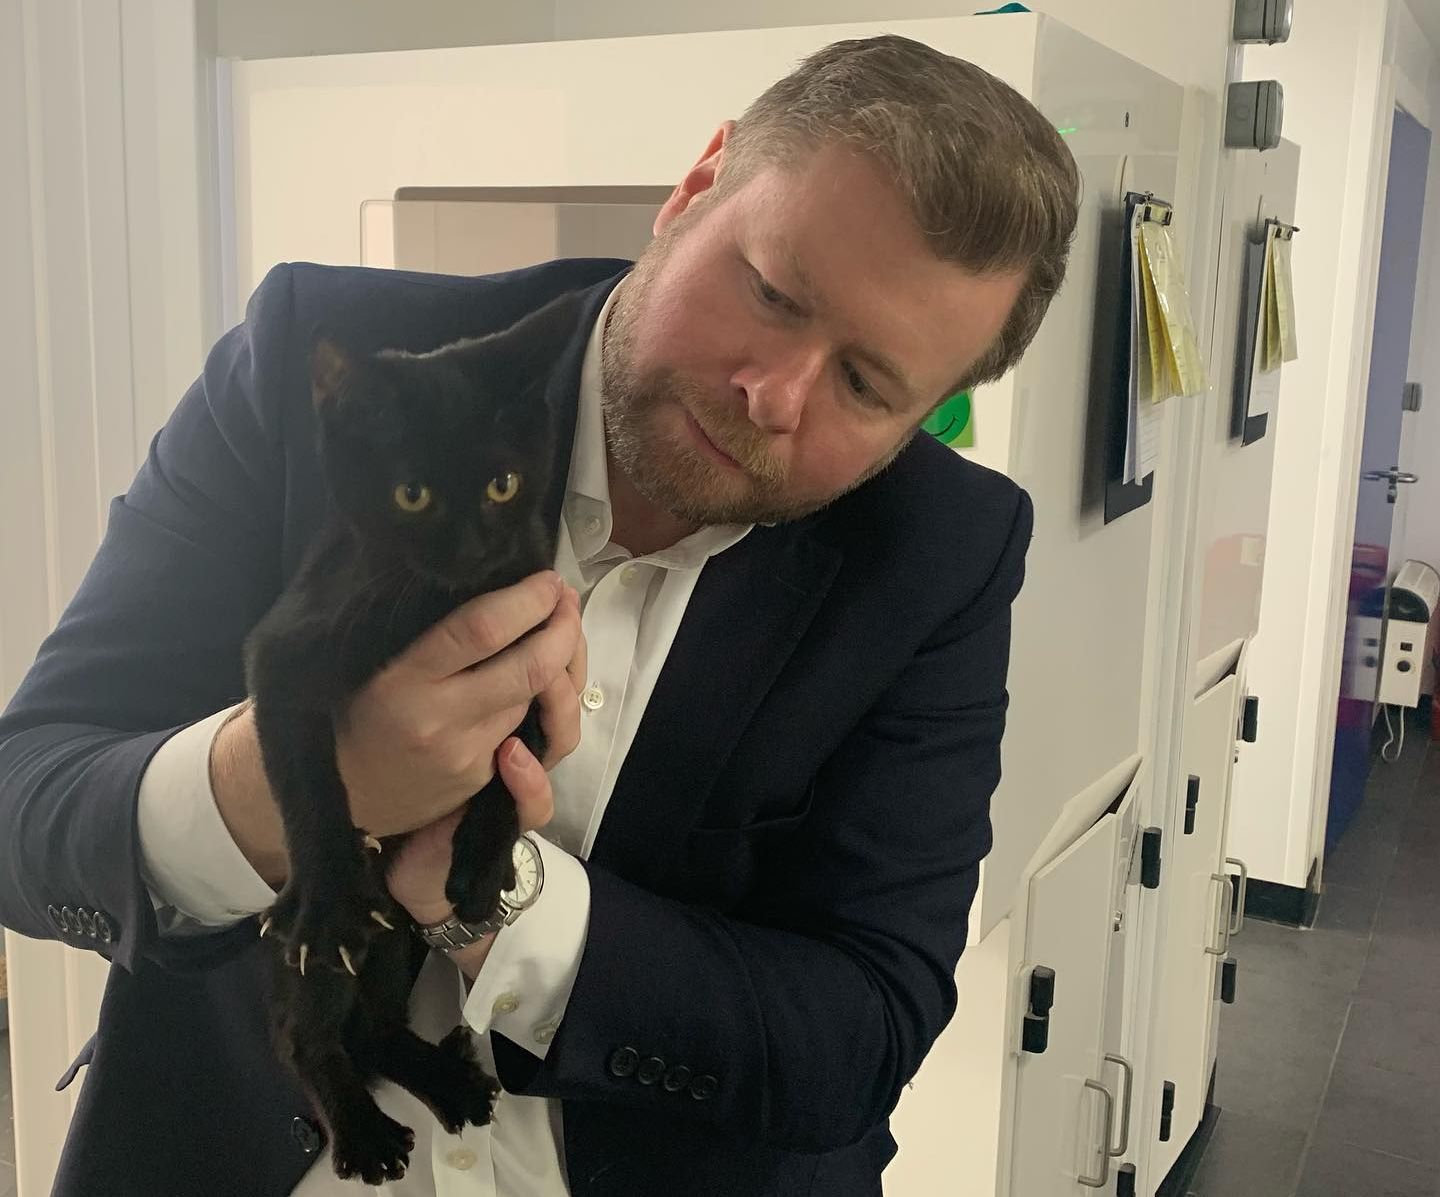 Southport MP Damien Moore has visited the Southport and Ormskirk District branch of the RSPCA to learn more about the work they are doing and to see the animals in their care